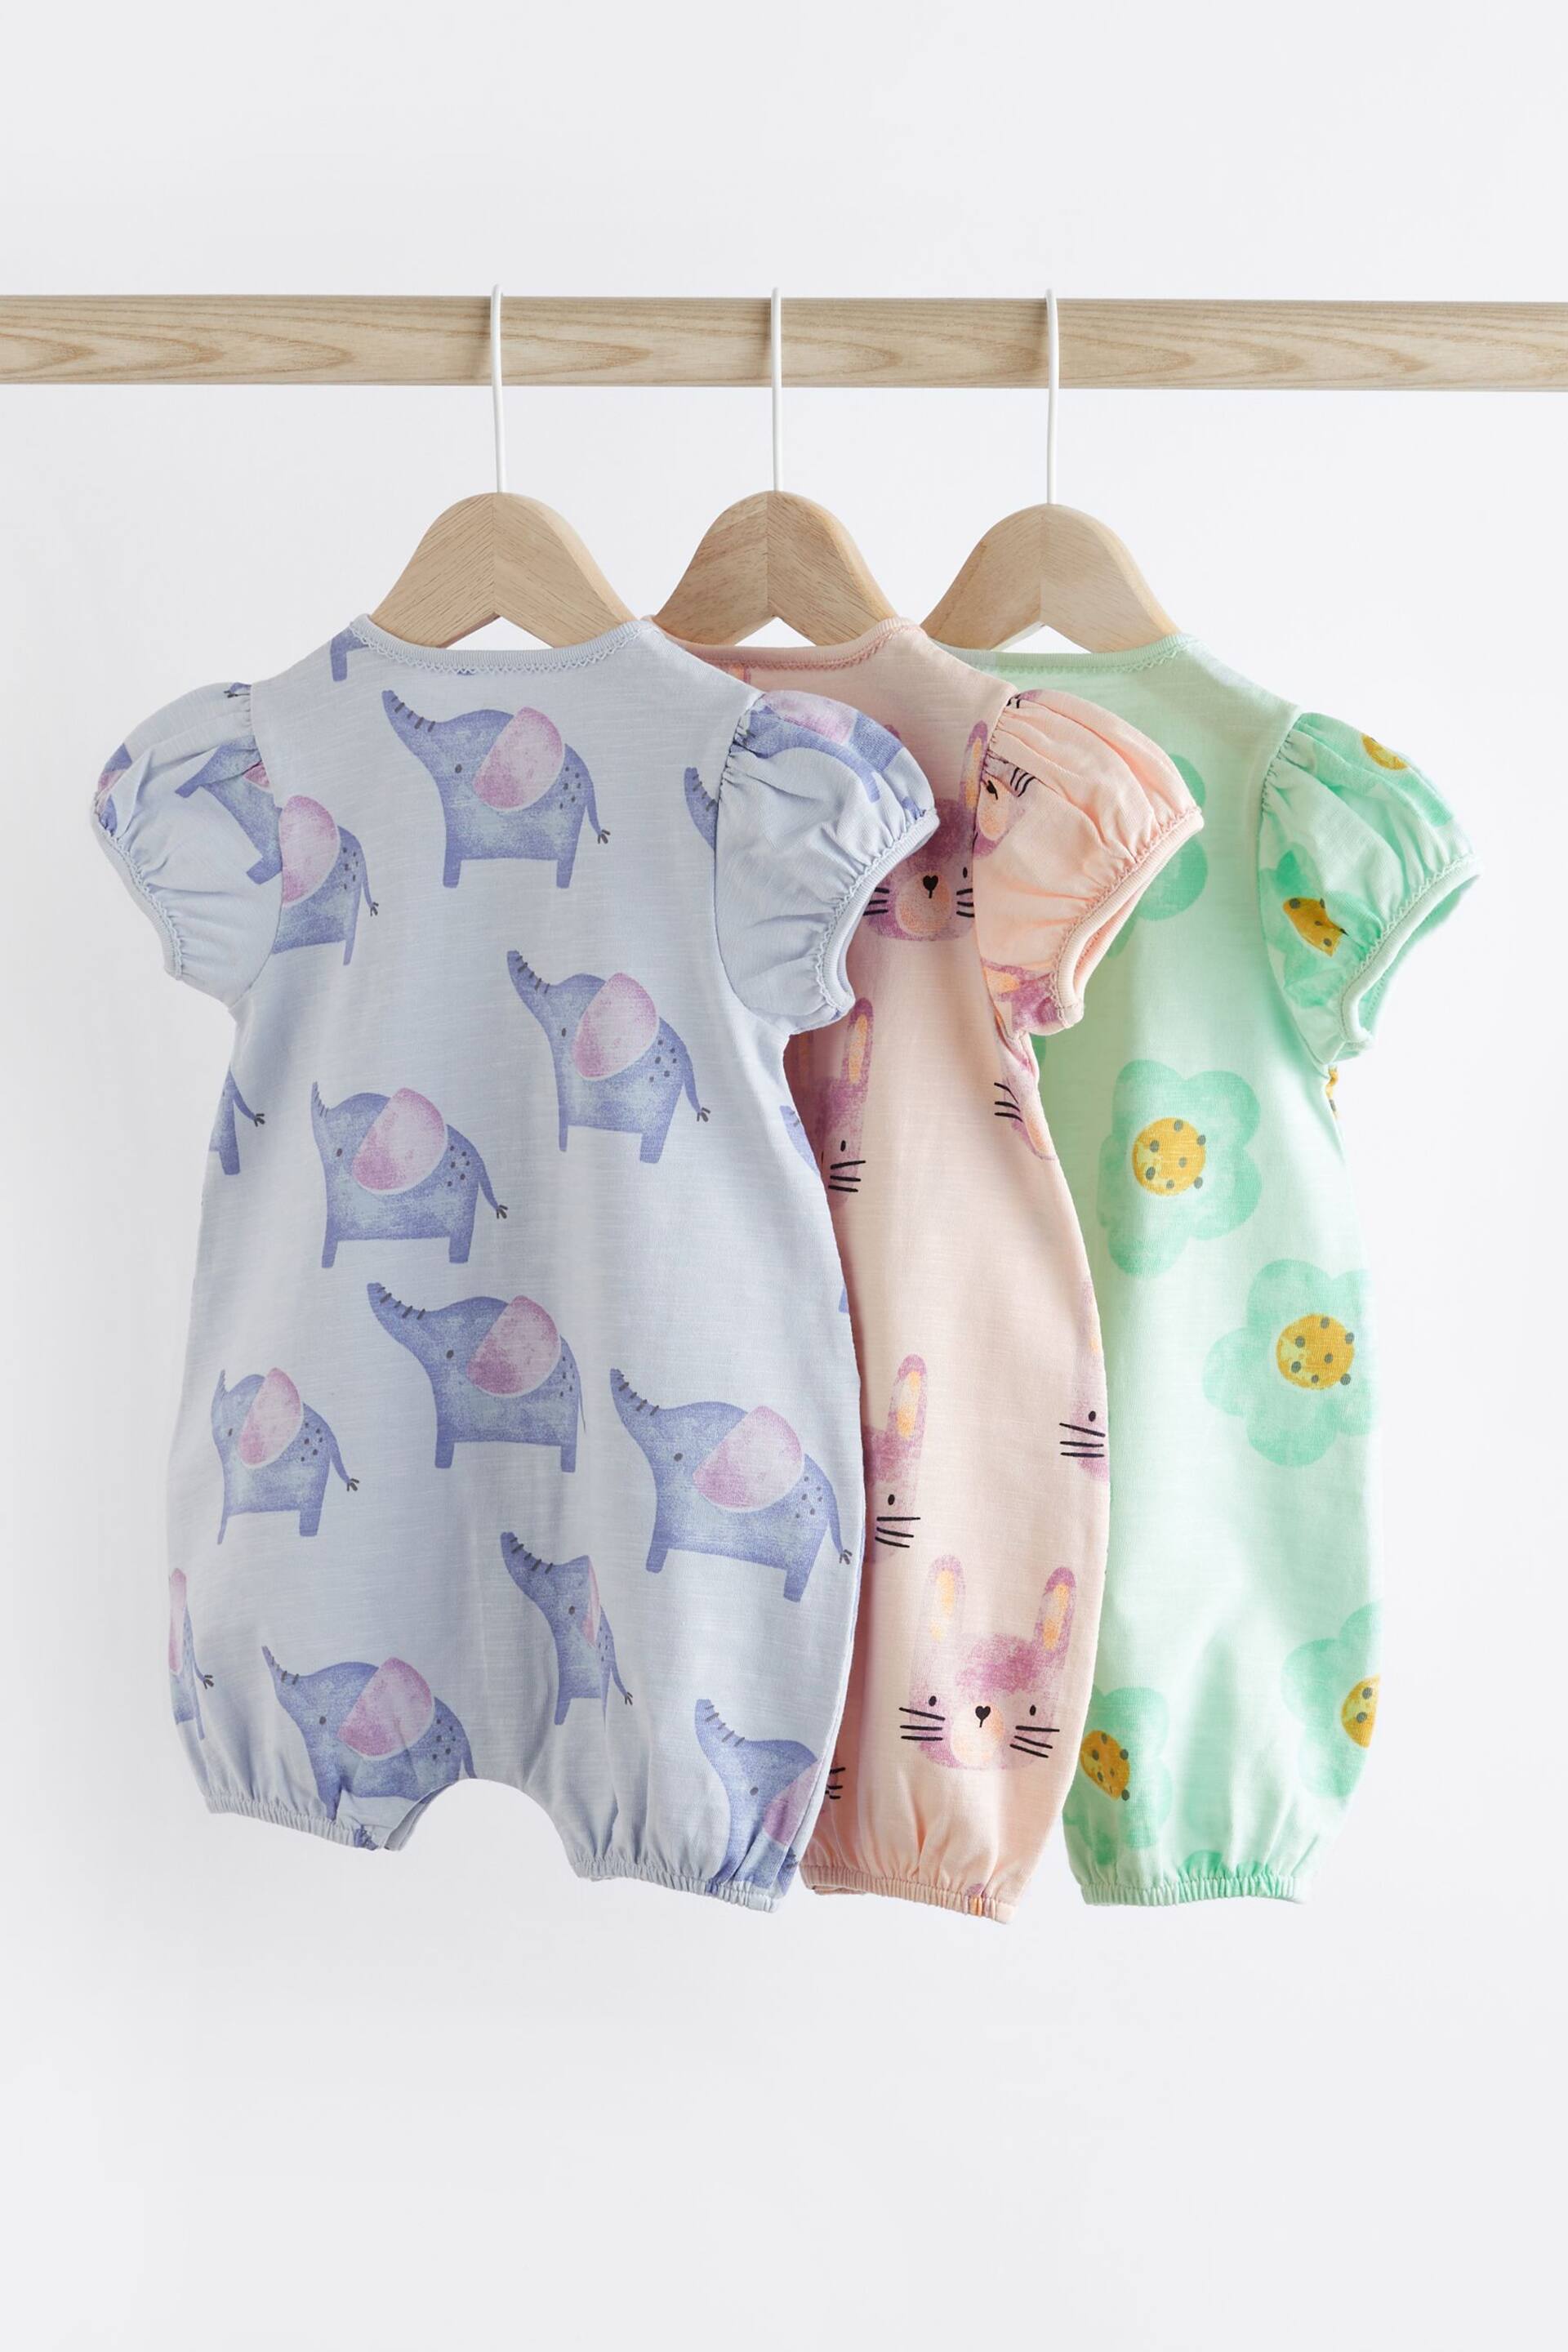 Pink/Blue character Baby Rompers 3 Pack - Image 5 of 9